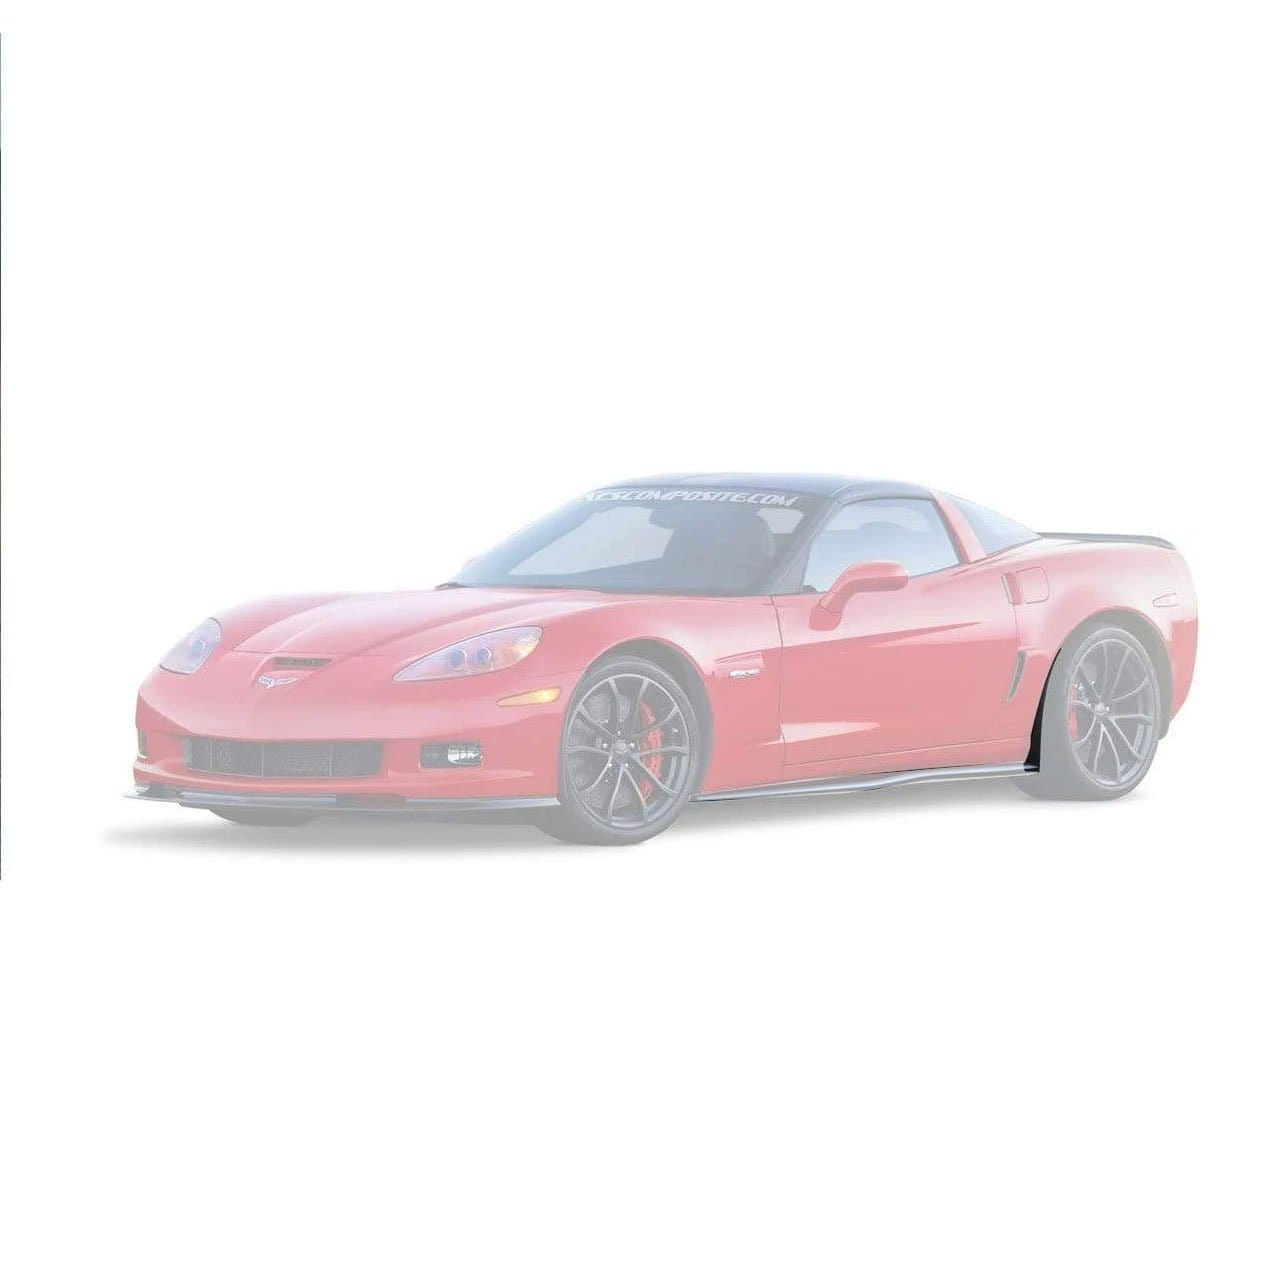 ACS Composite Z06 GS Rear Wheel Deflectors in Satin Black [27-4-027]SBK - Protects Corvette's bodywork and adds style